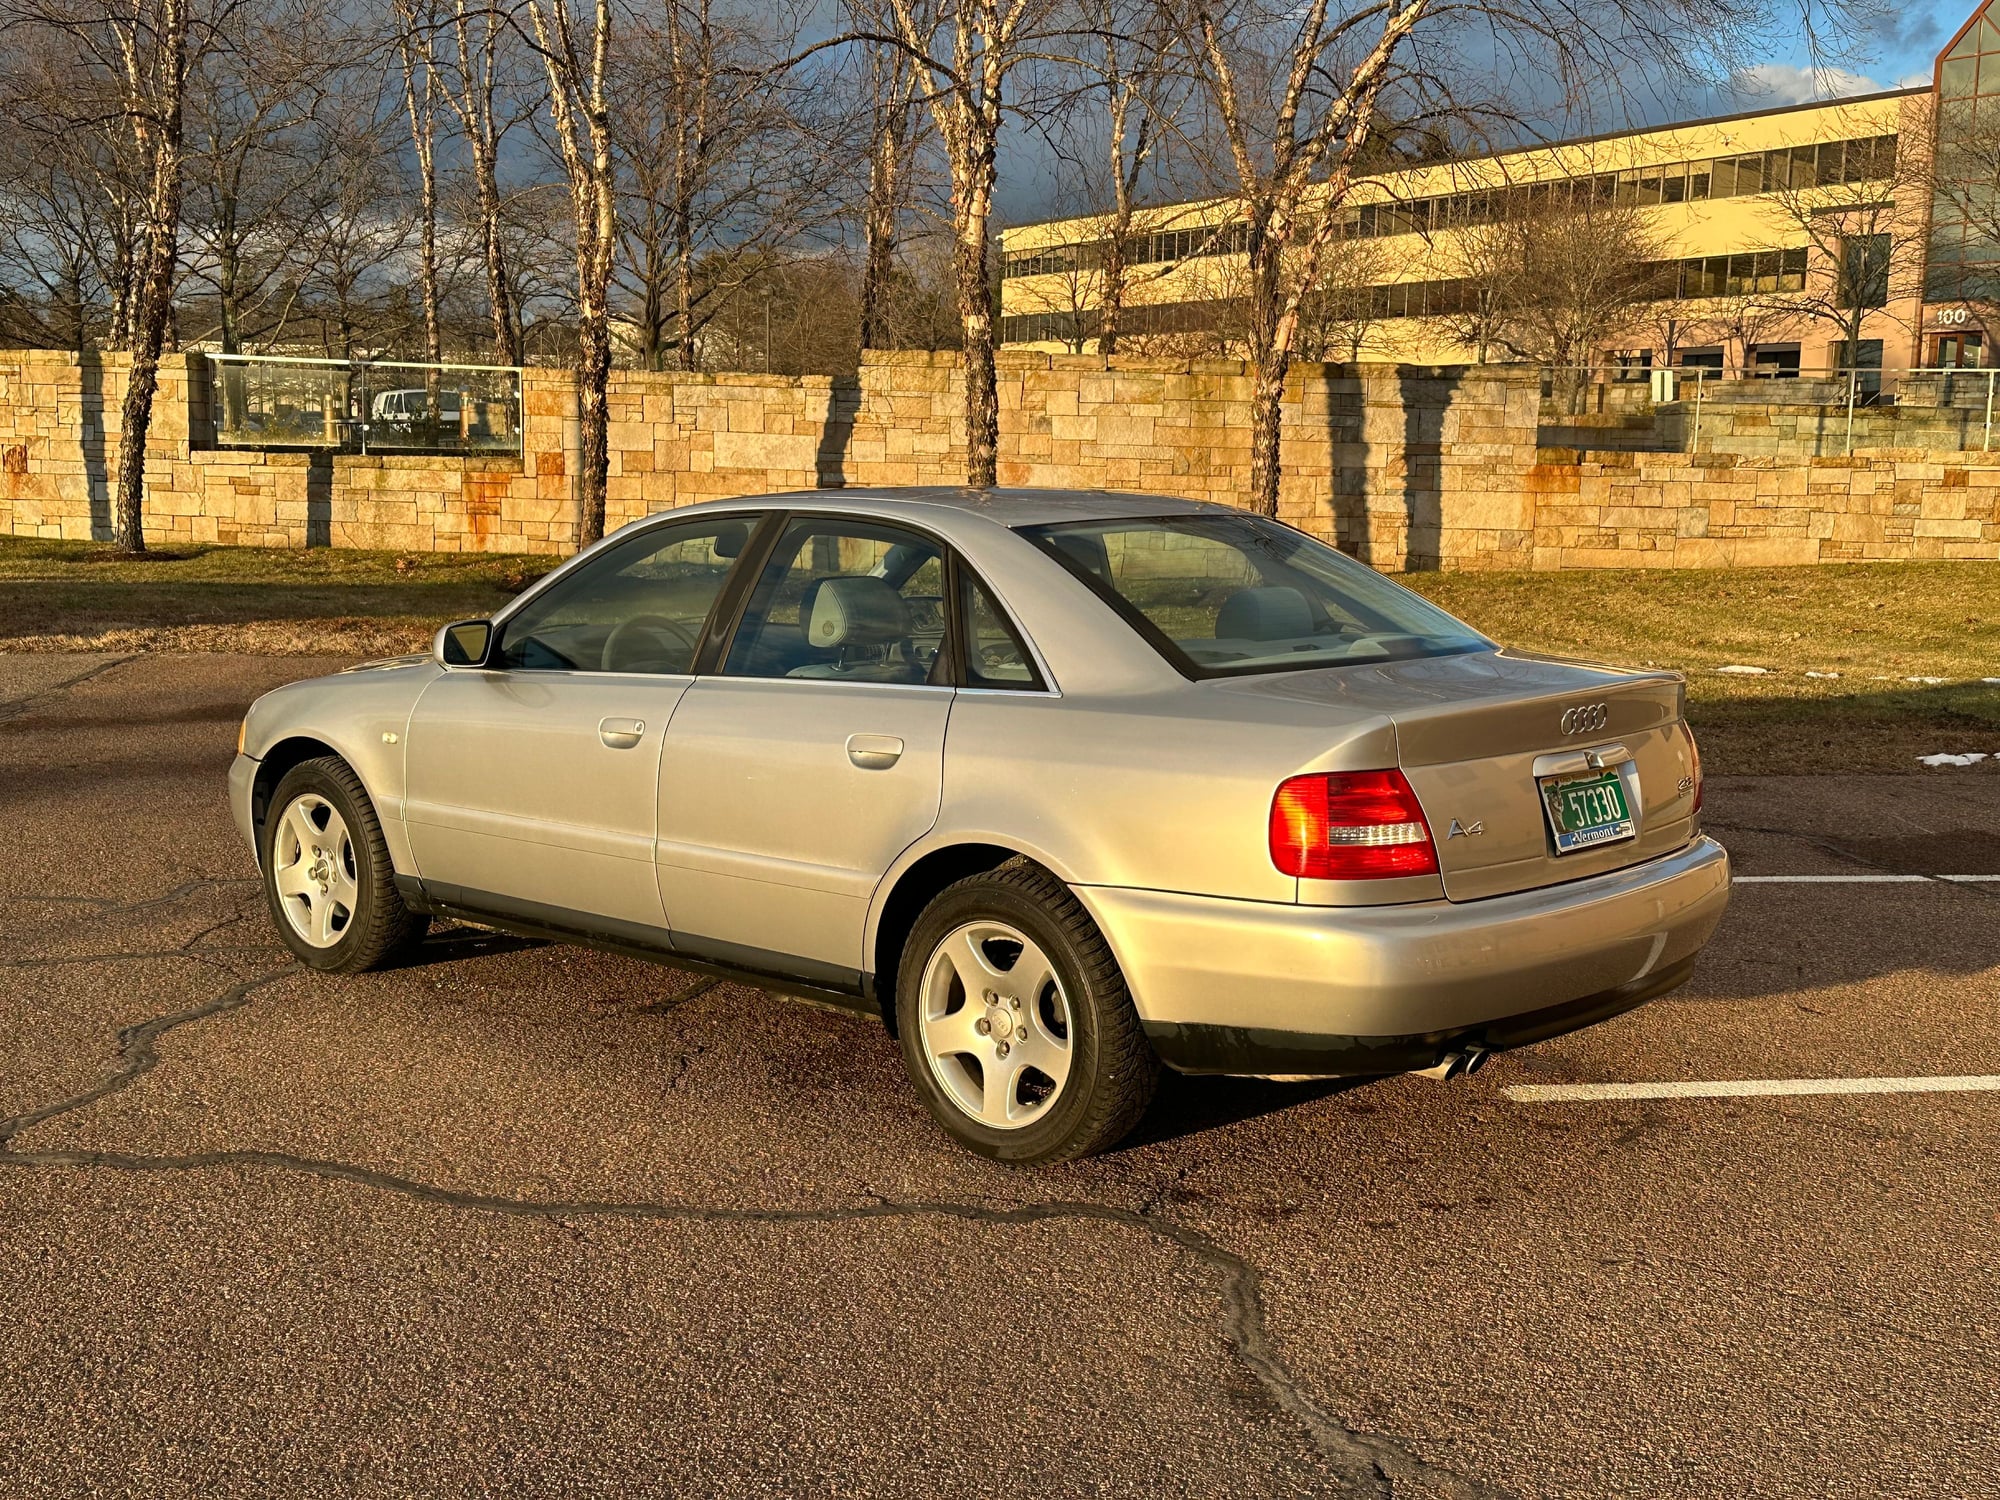 2001 Audi A4 - 2001 Audi A4 2.8 manual with cloth sport seats, no mods, and ultra low miles - Used - VIN WAUDH68D71A036037 - 48,500 Miles - 6 cyl - AWD - Manual - Sedan - Silver - Burlington, VT 05401, United States